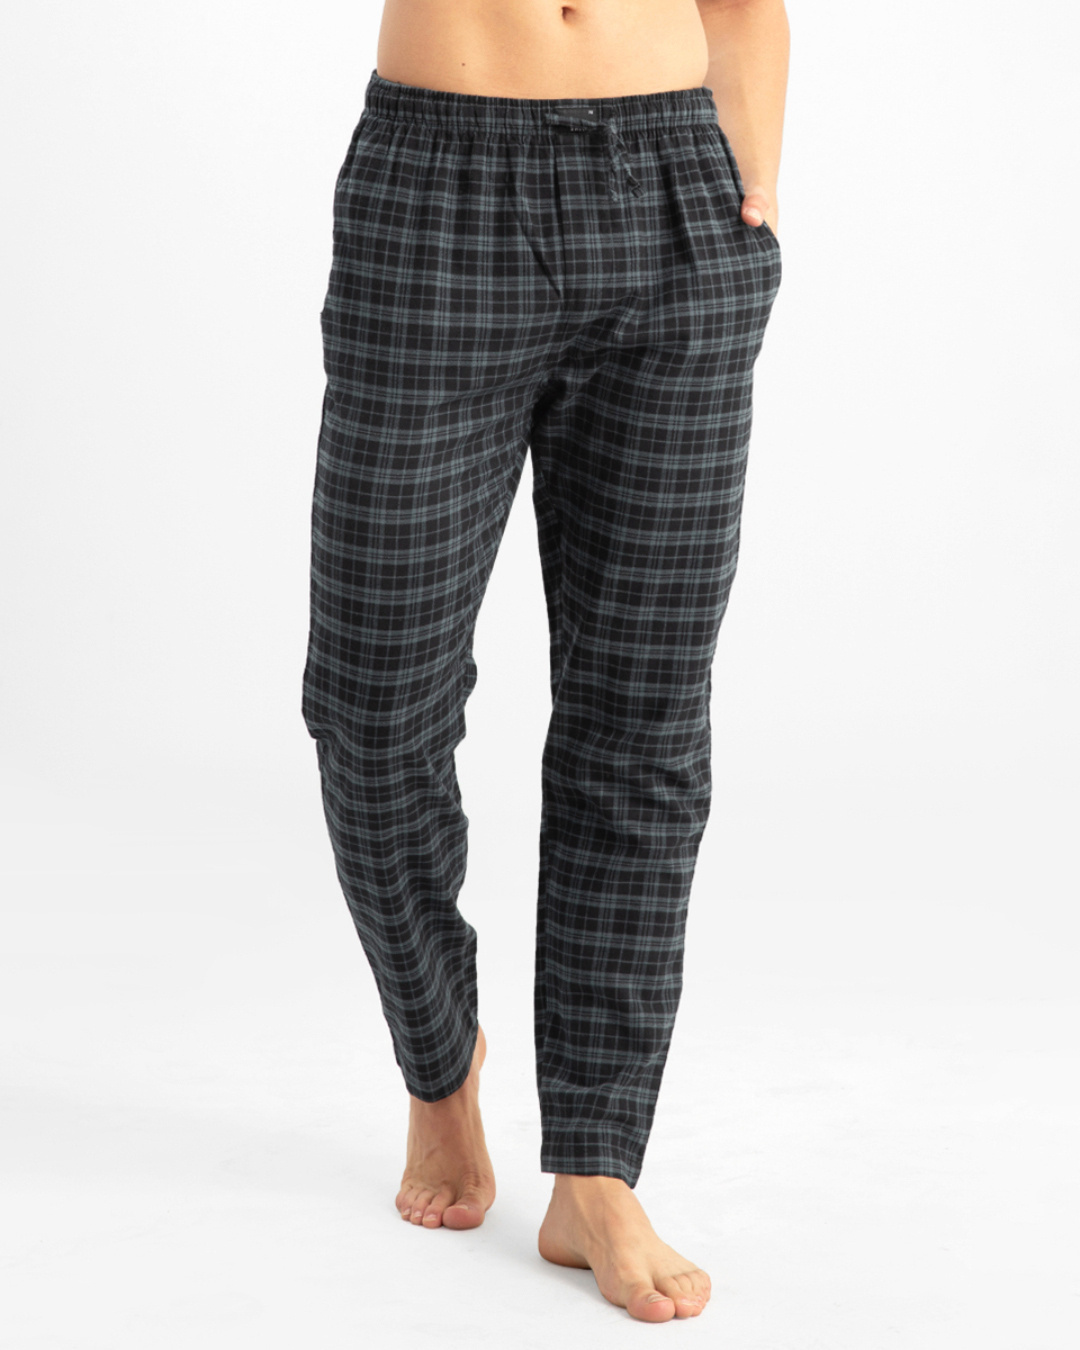 Buy Men's Black Checked Cotton Relaxed Fit Pyjamas Online in India at ...